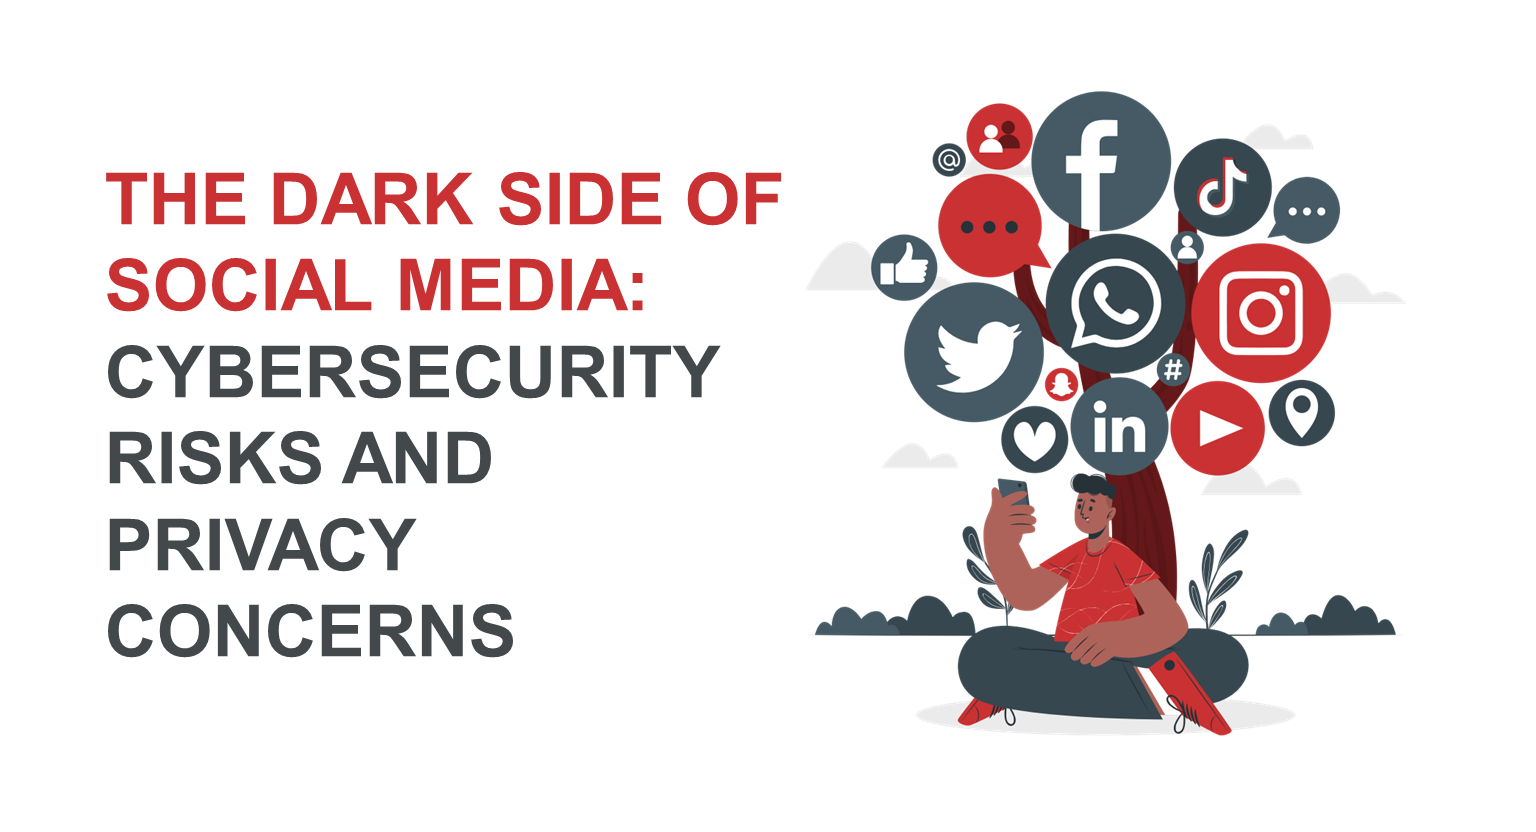 The dark side of social media: cybersecurity risks and privacy concerns